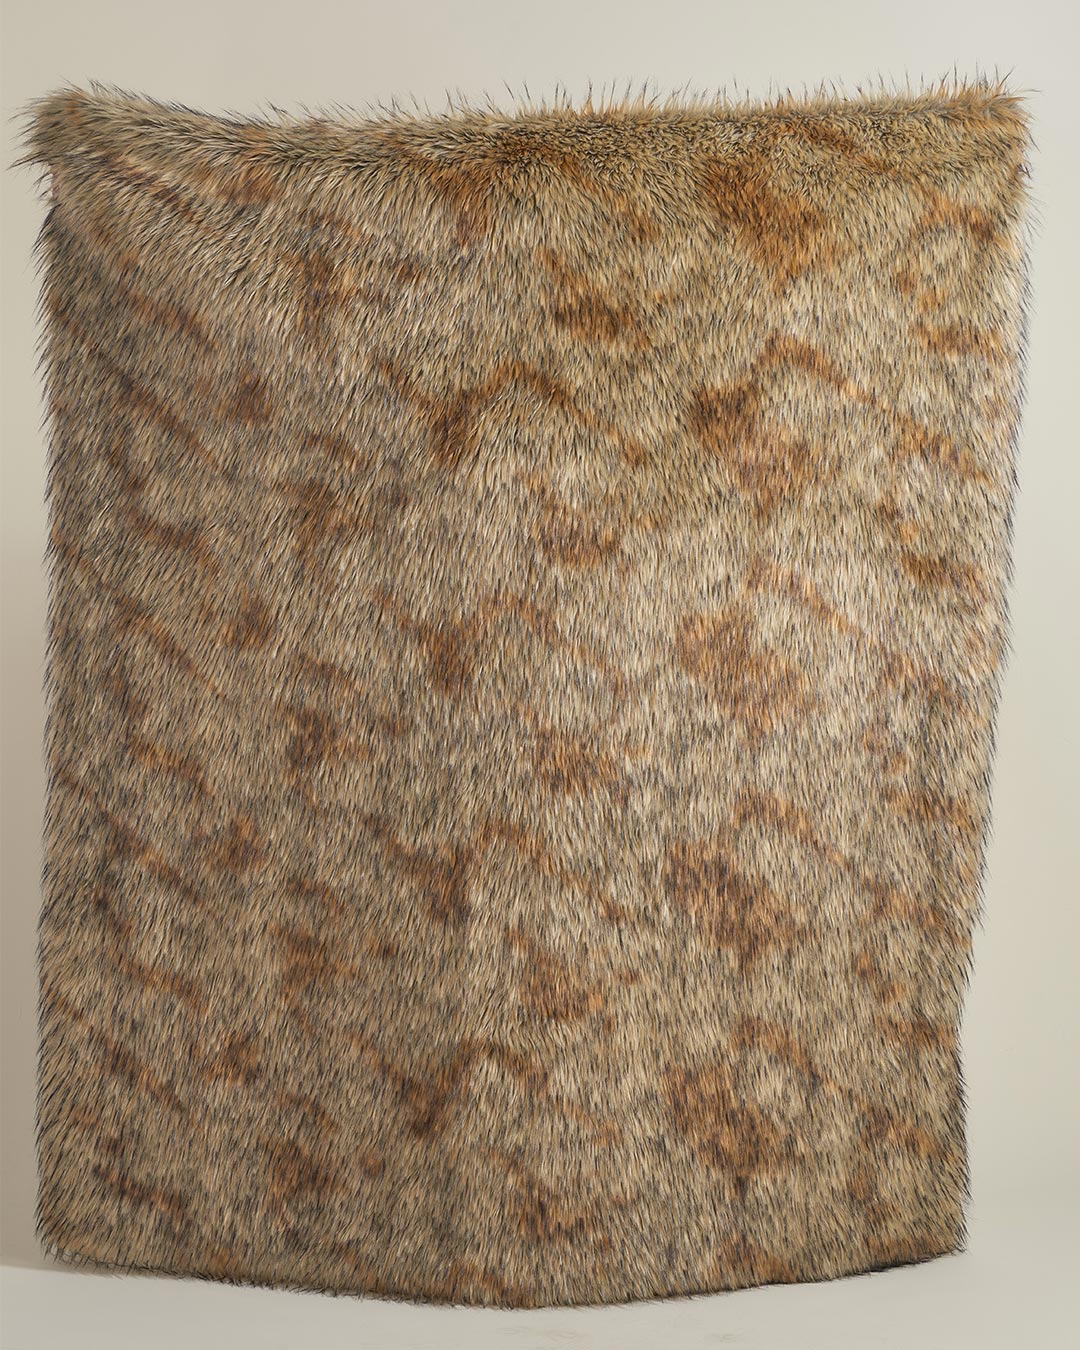 Fur Side of Golden Jackal Collector Edition Faux Fur Throw